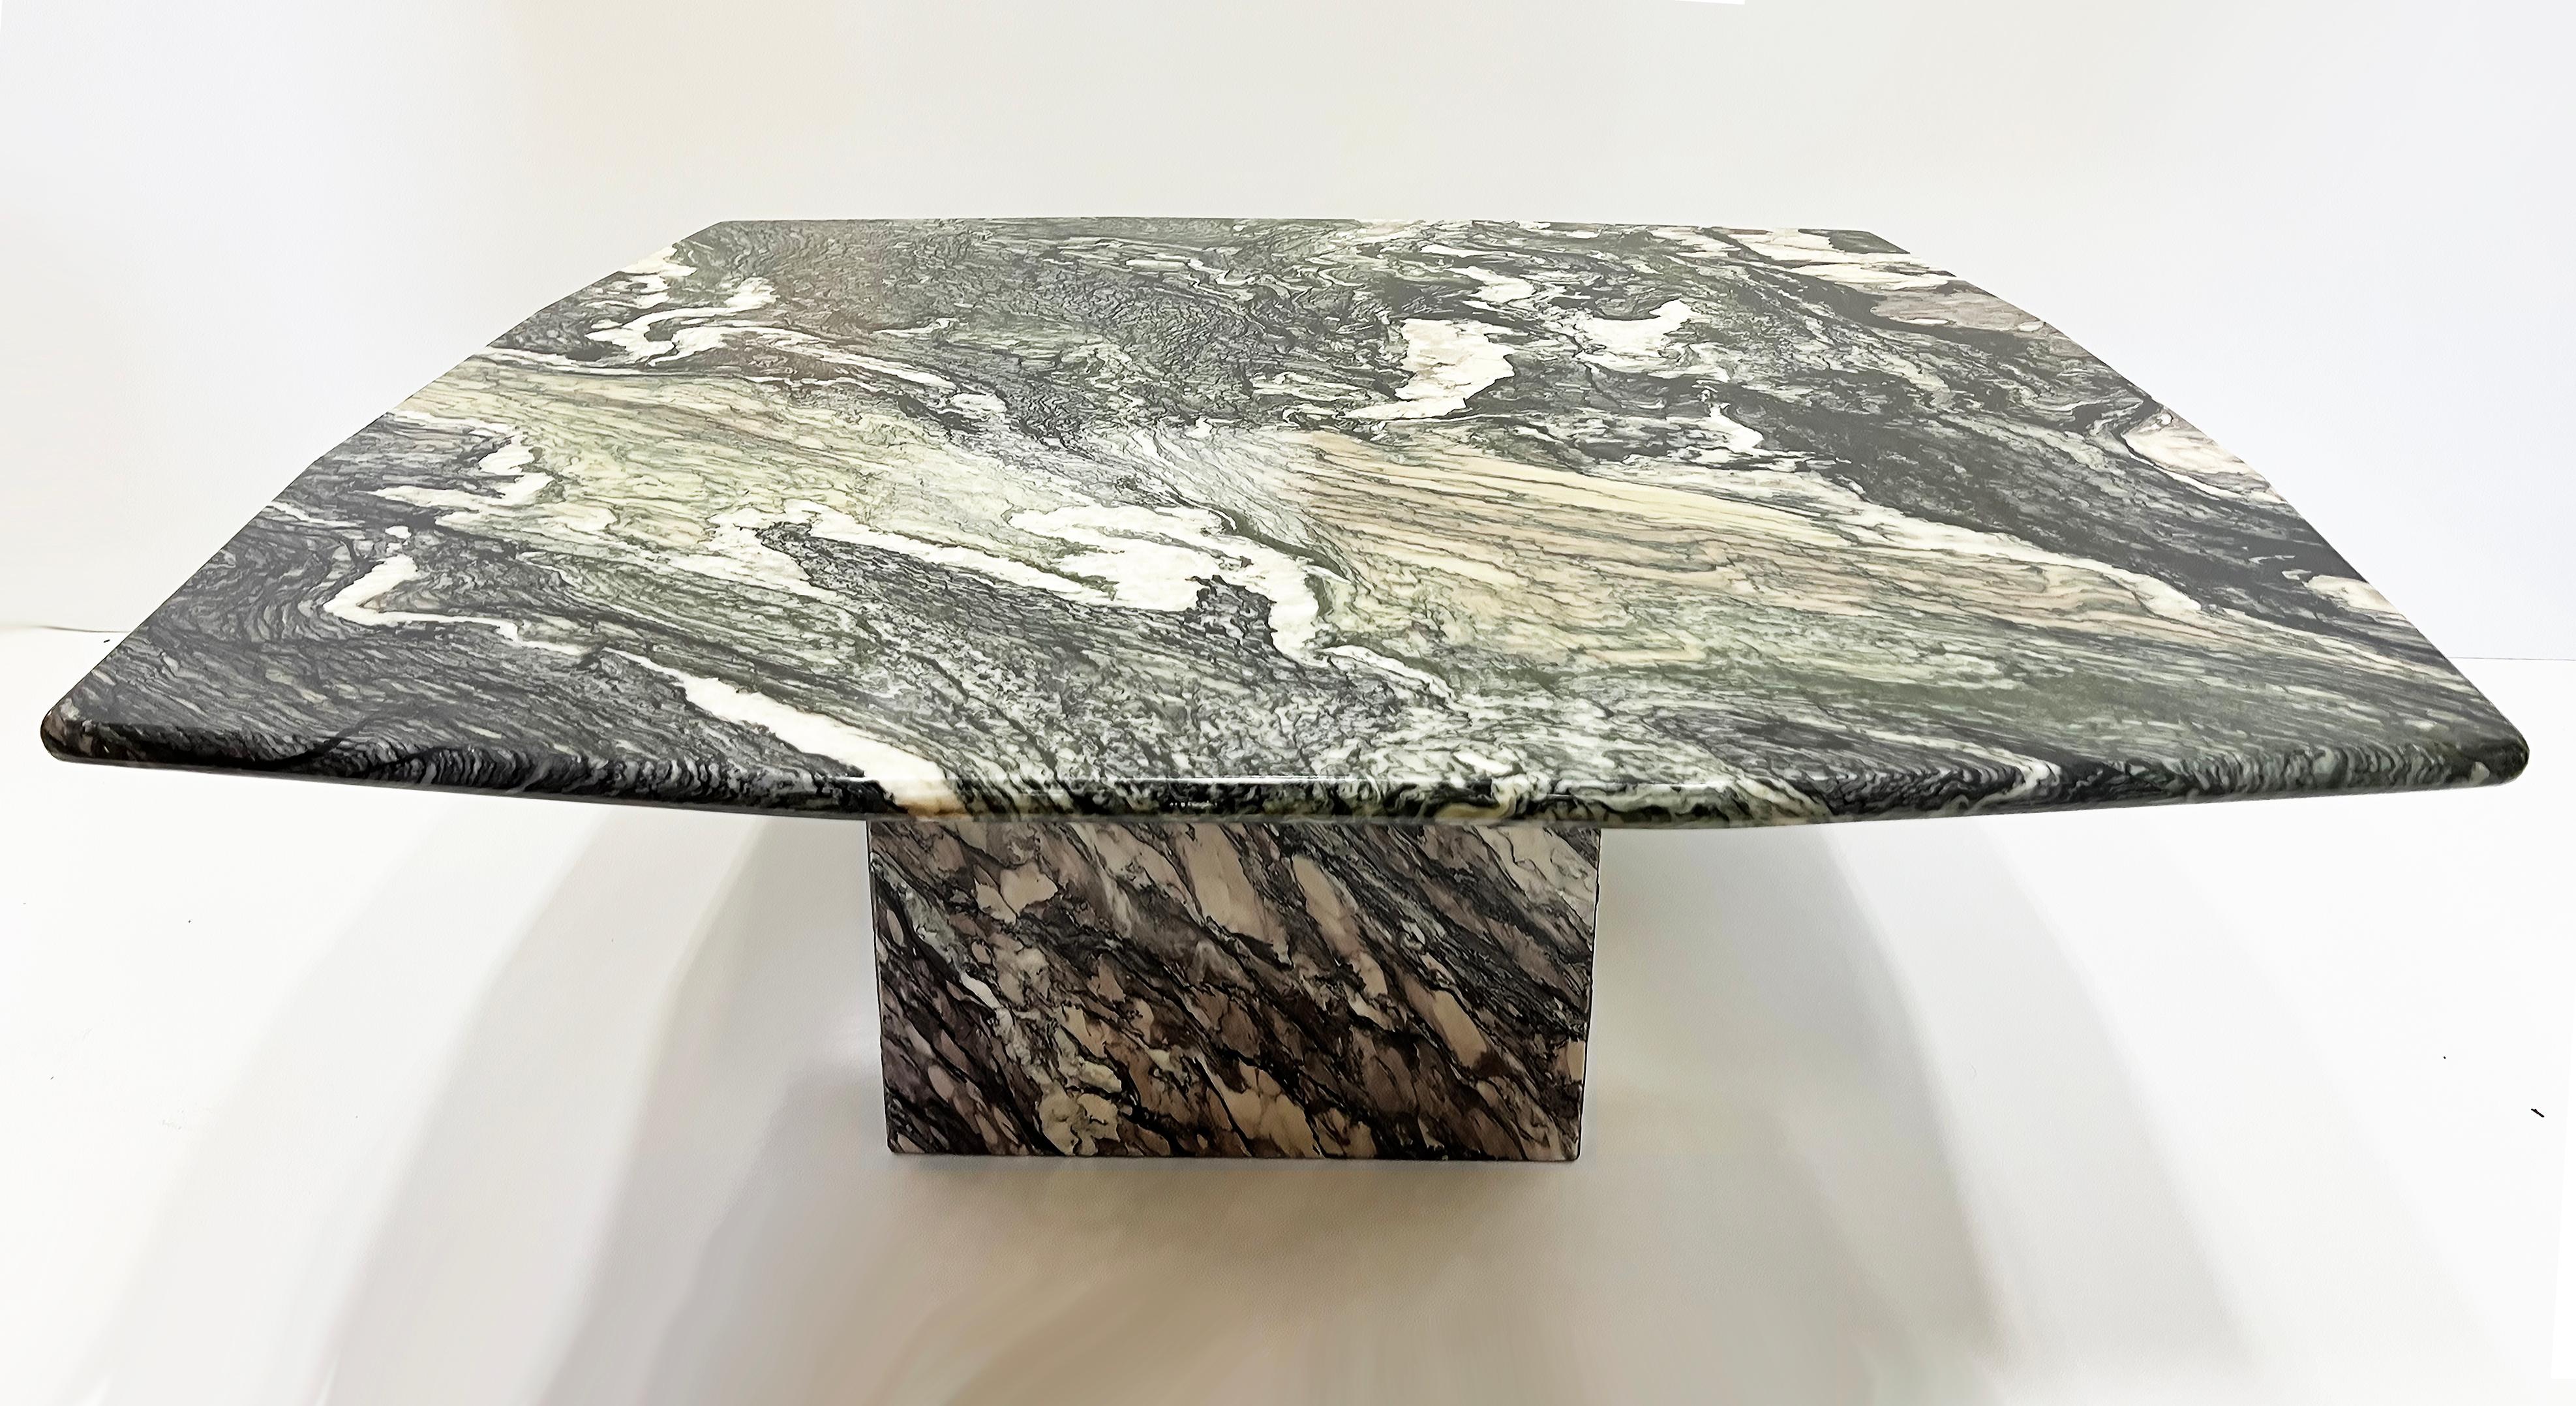 Italian Post-Modern Cipollino Ondulato Marble Coffee Table

Offered for sale is a stunning Italian Post-Modern coffee table created with exotic Cipollino Ondulato marble. Then unusually shaped top has flat edges that curve in slightly to each